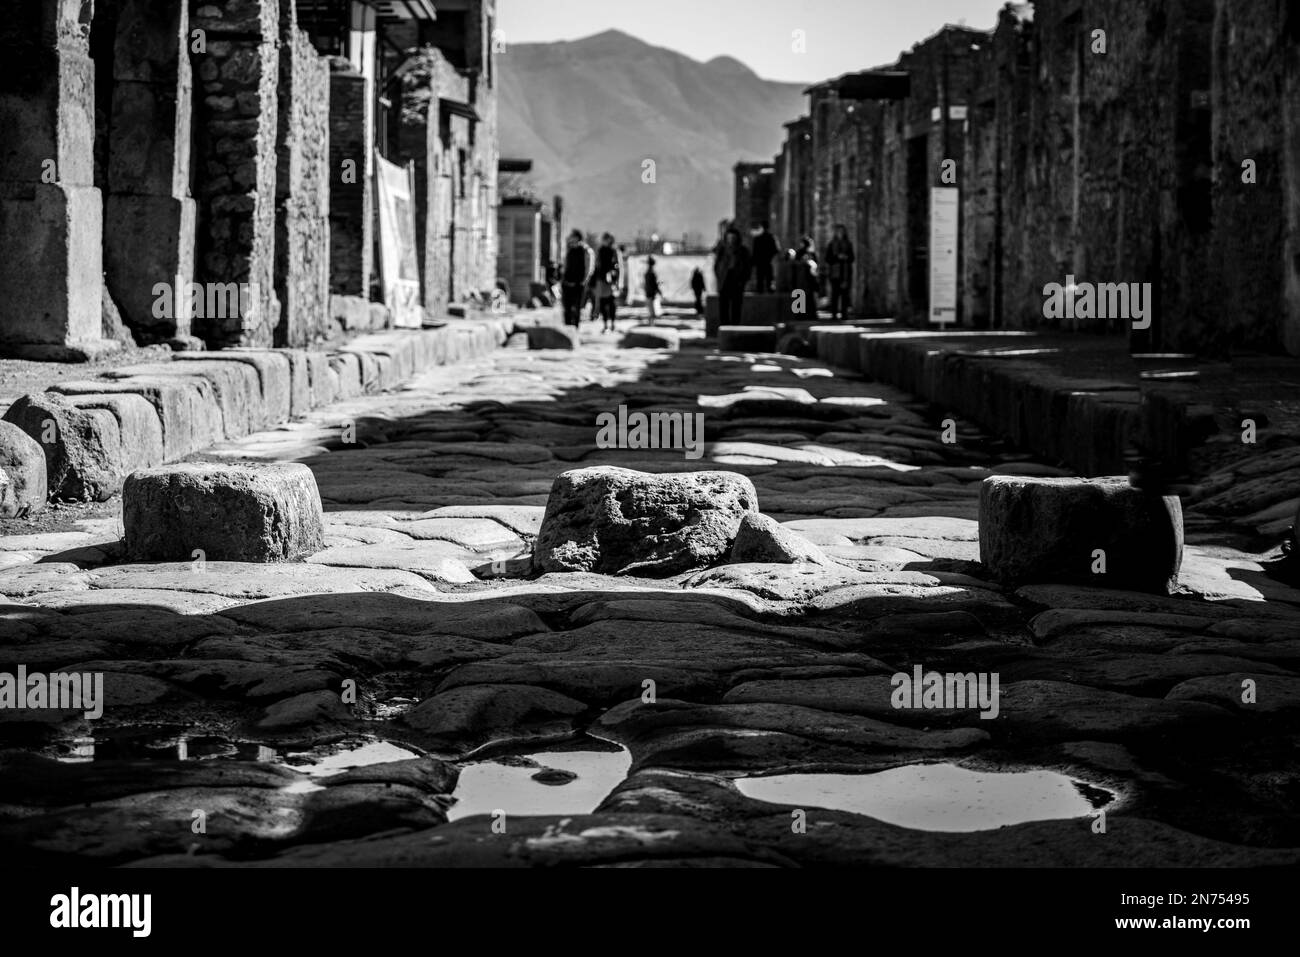 Pompeii, Italy, A crosswalk of a typical Roman road in the ancient city of Pompeii, Southern Italy Stock Photo